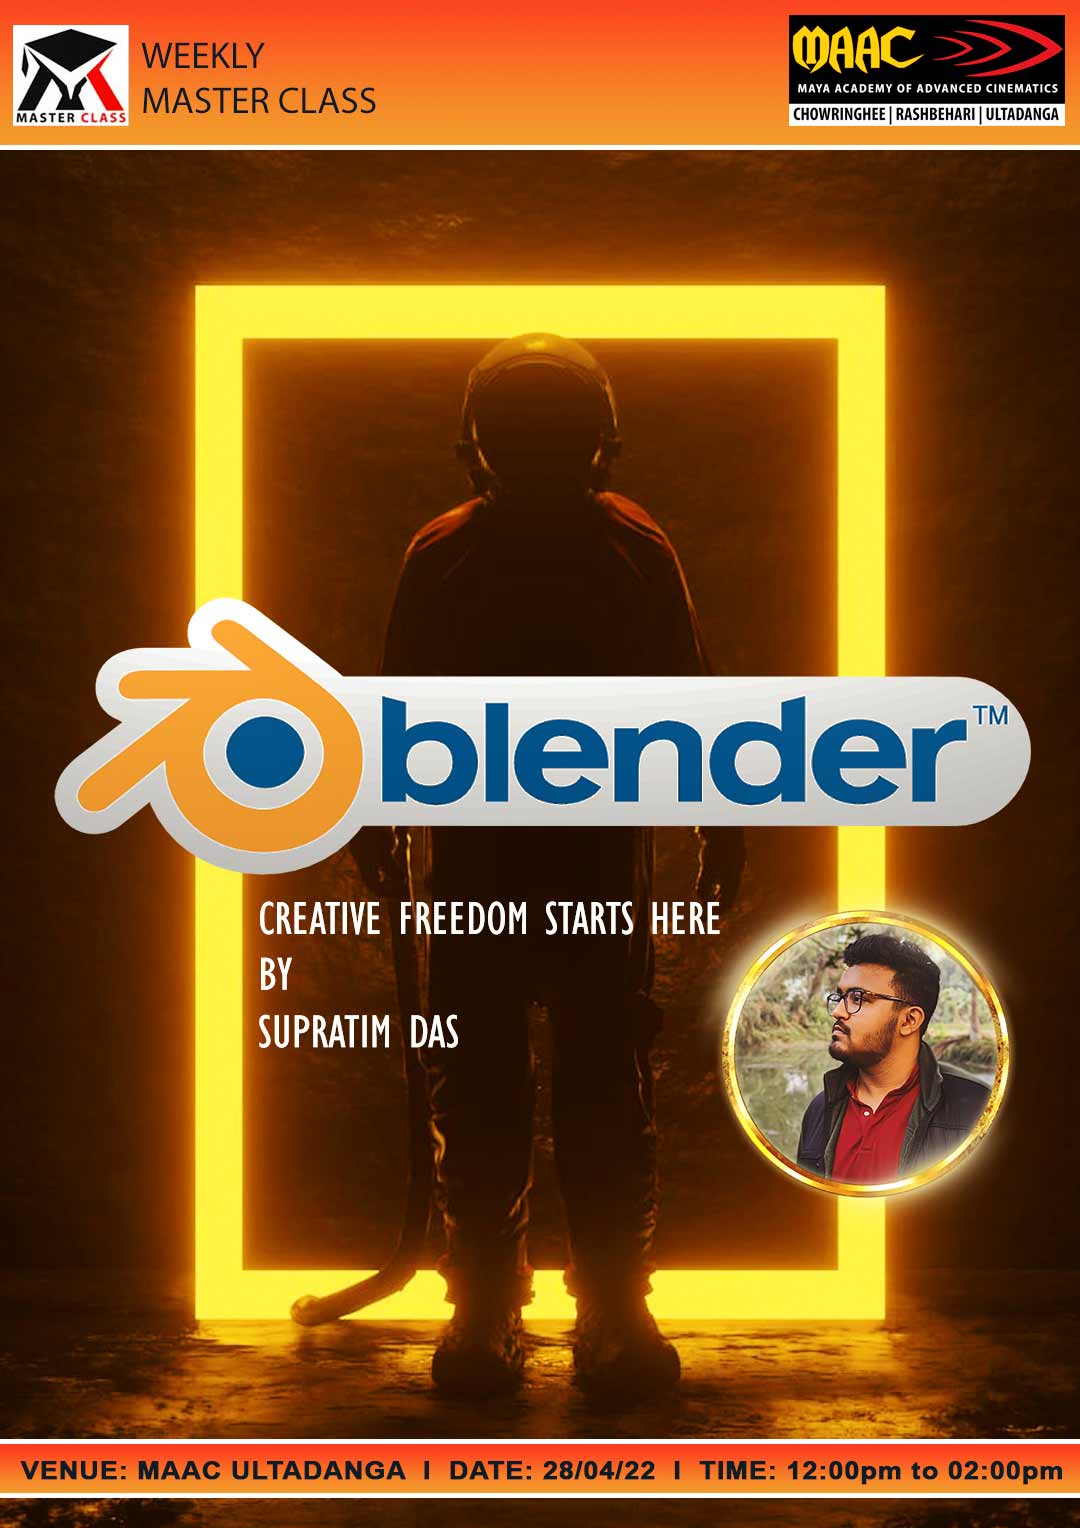 Weekly Master Class on Blender Session